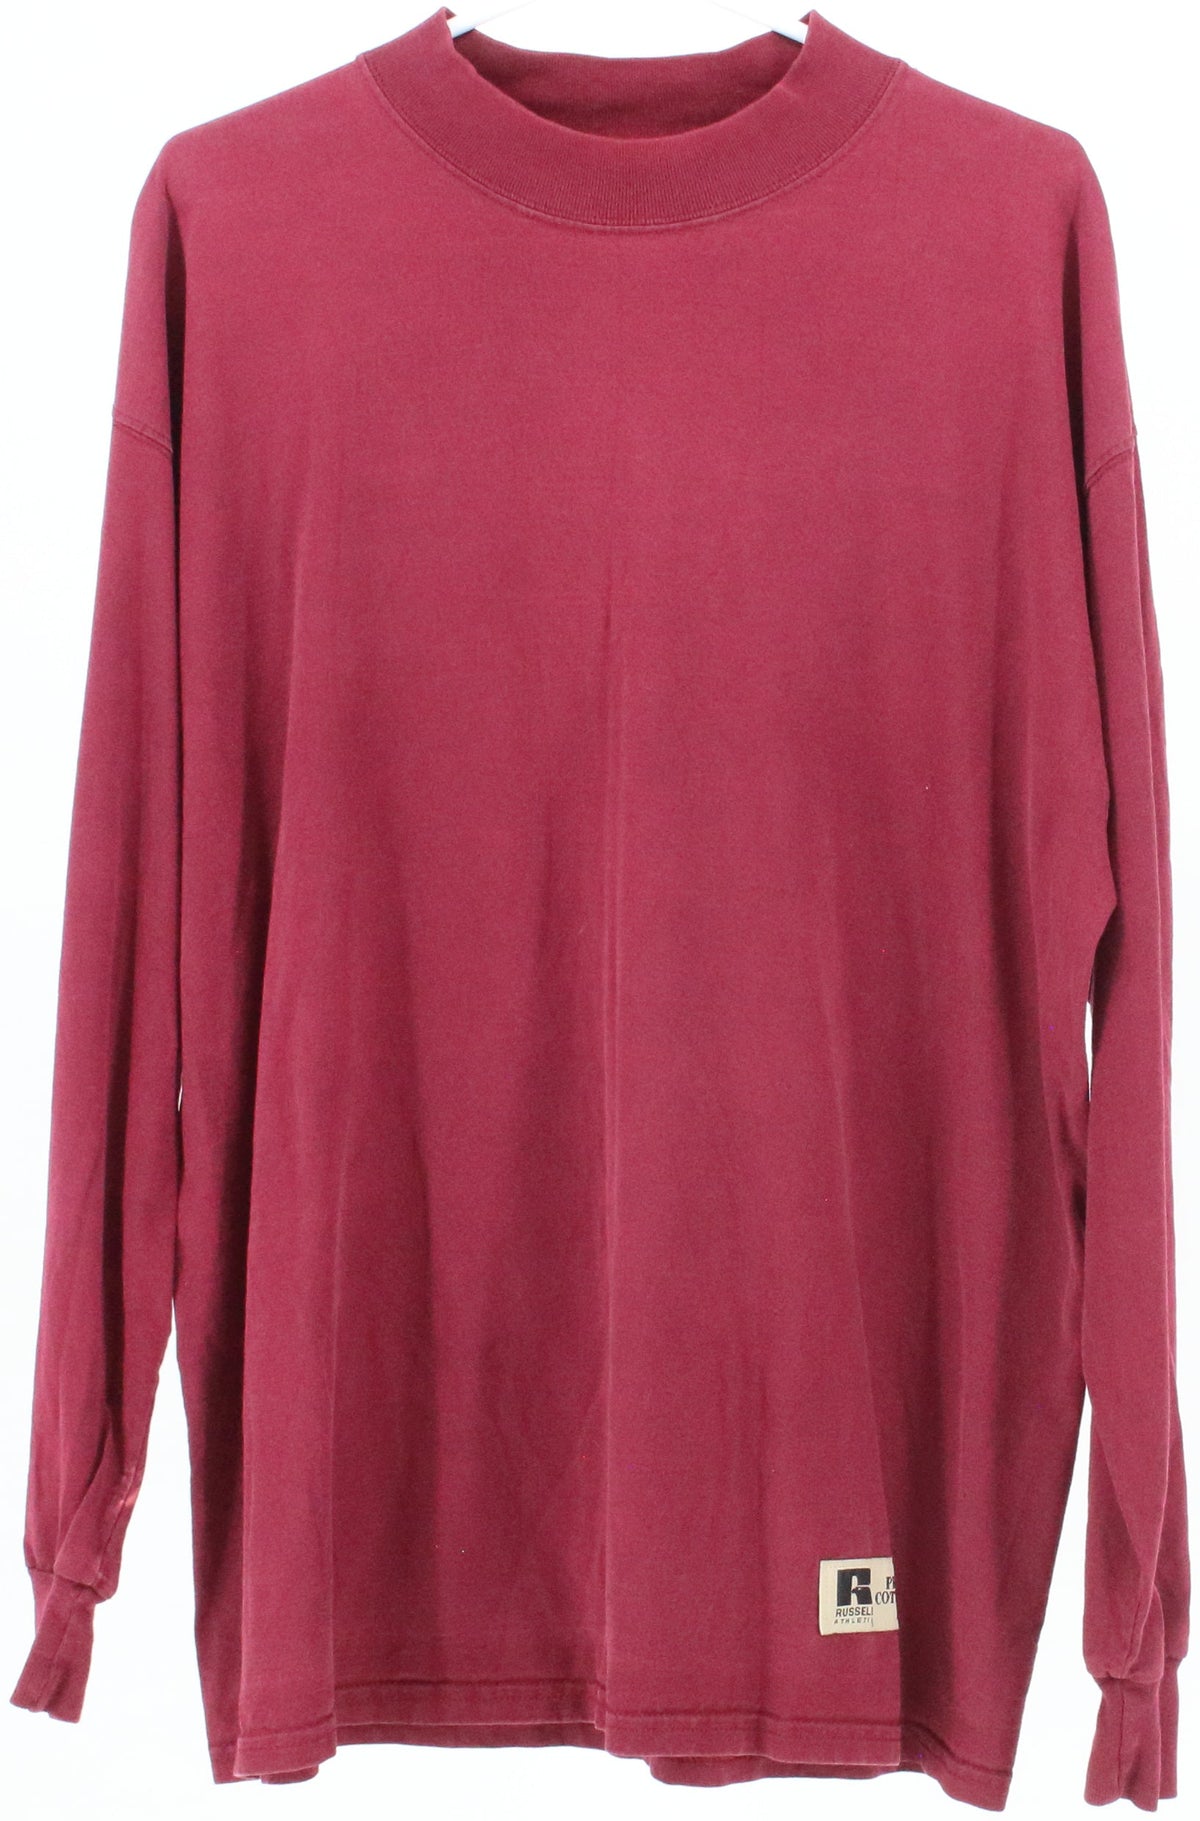 Russell Athletic Pro Cotton Burgundy Long Sleeve Mock Neck T-Shirt